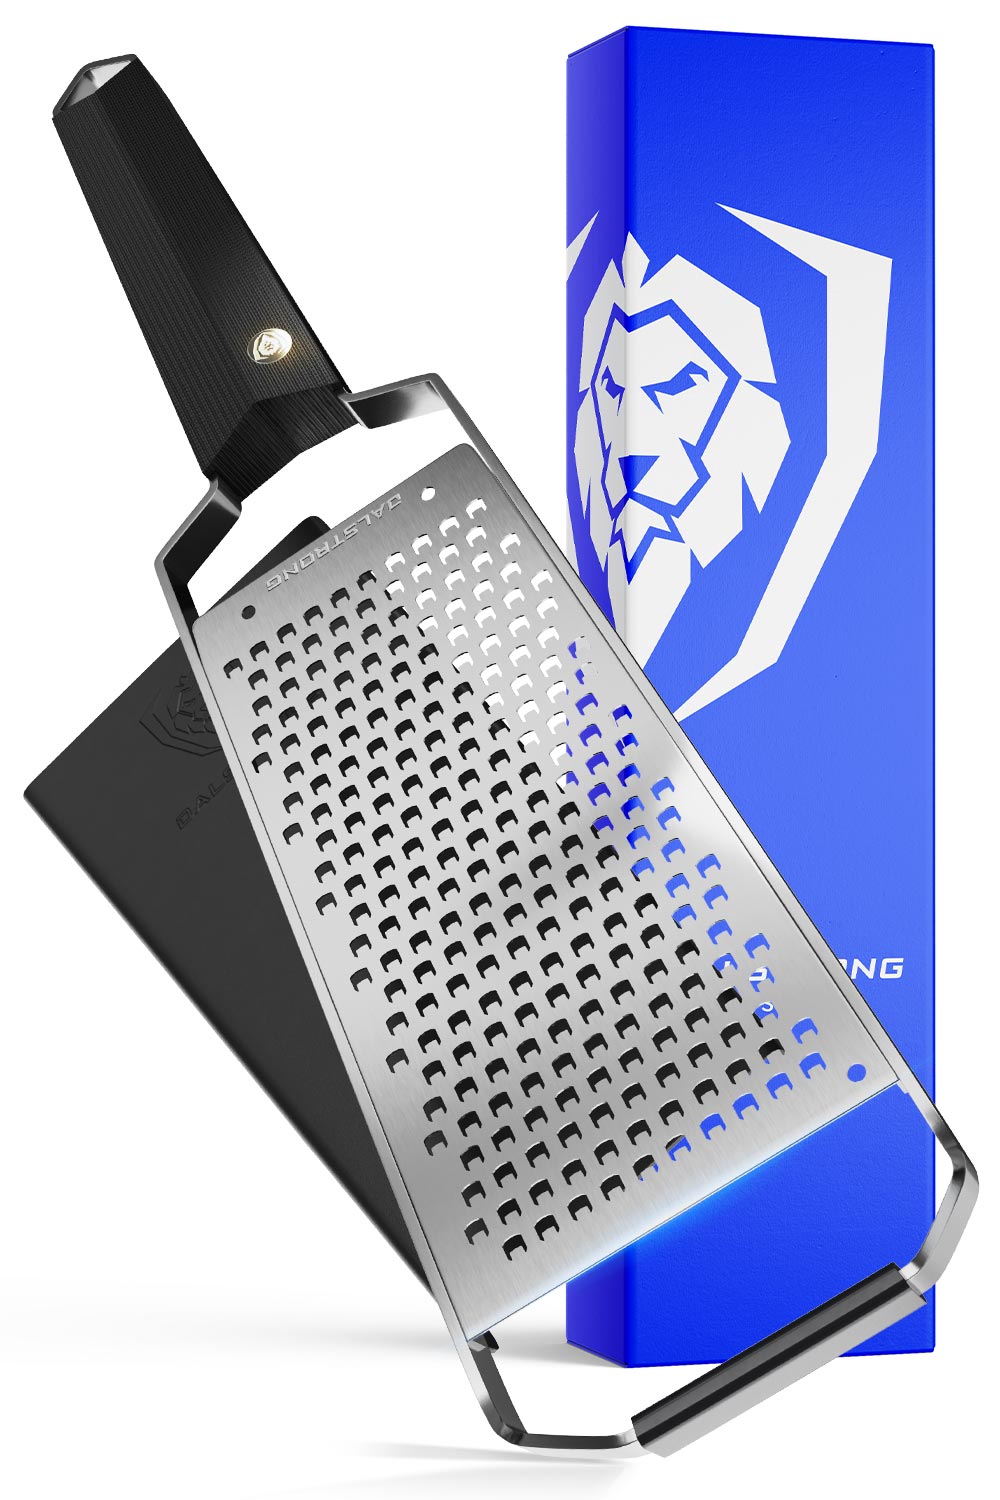 Dalstrong professional coarse wide cheese grater in front of it's premium packaging.